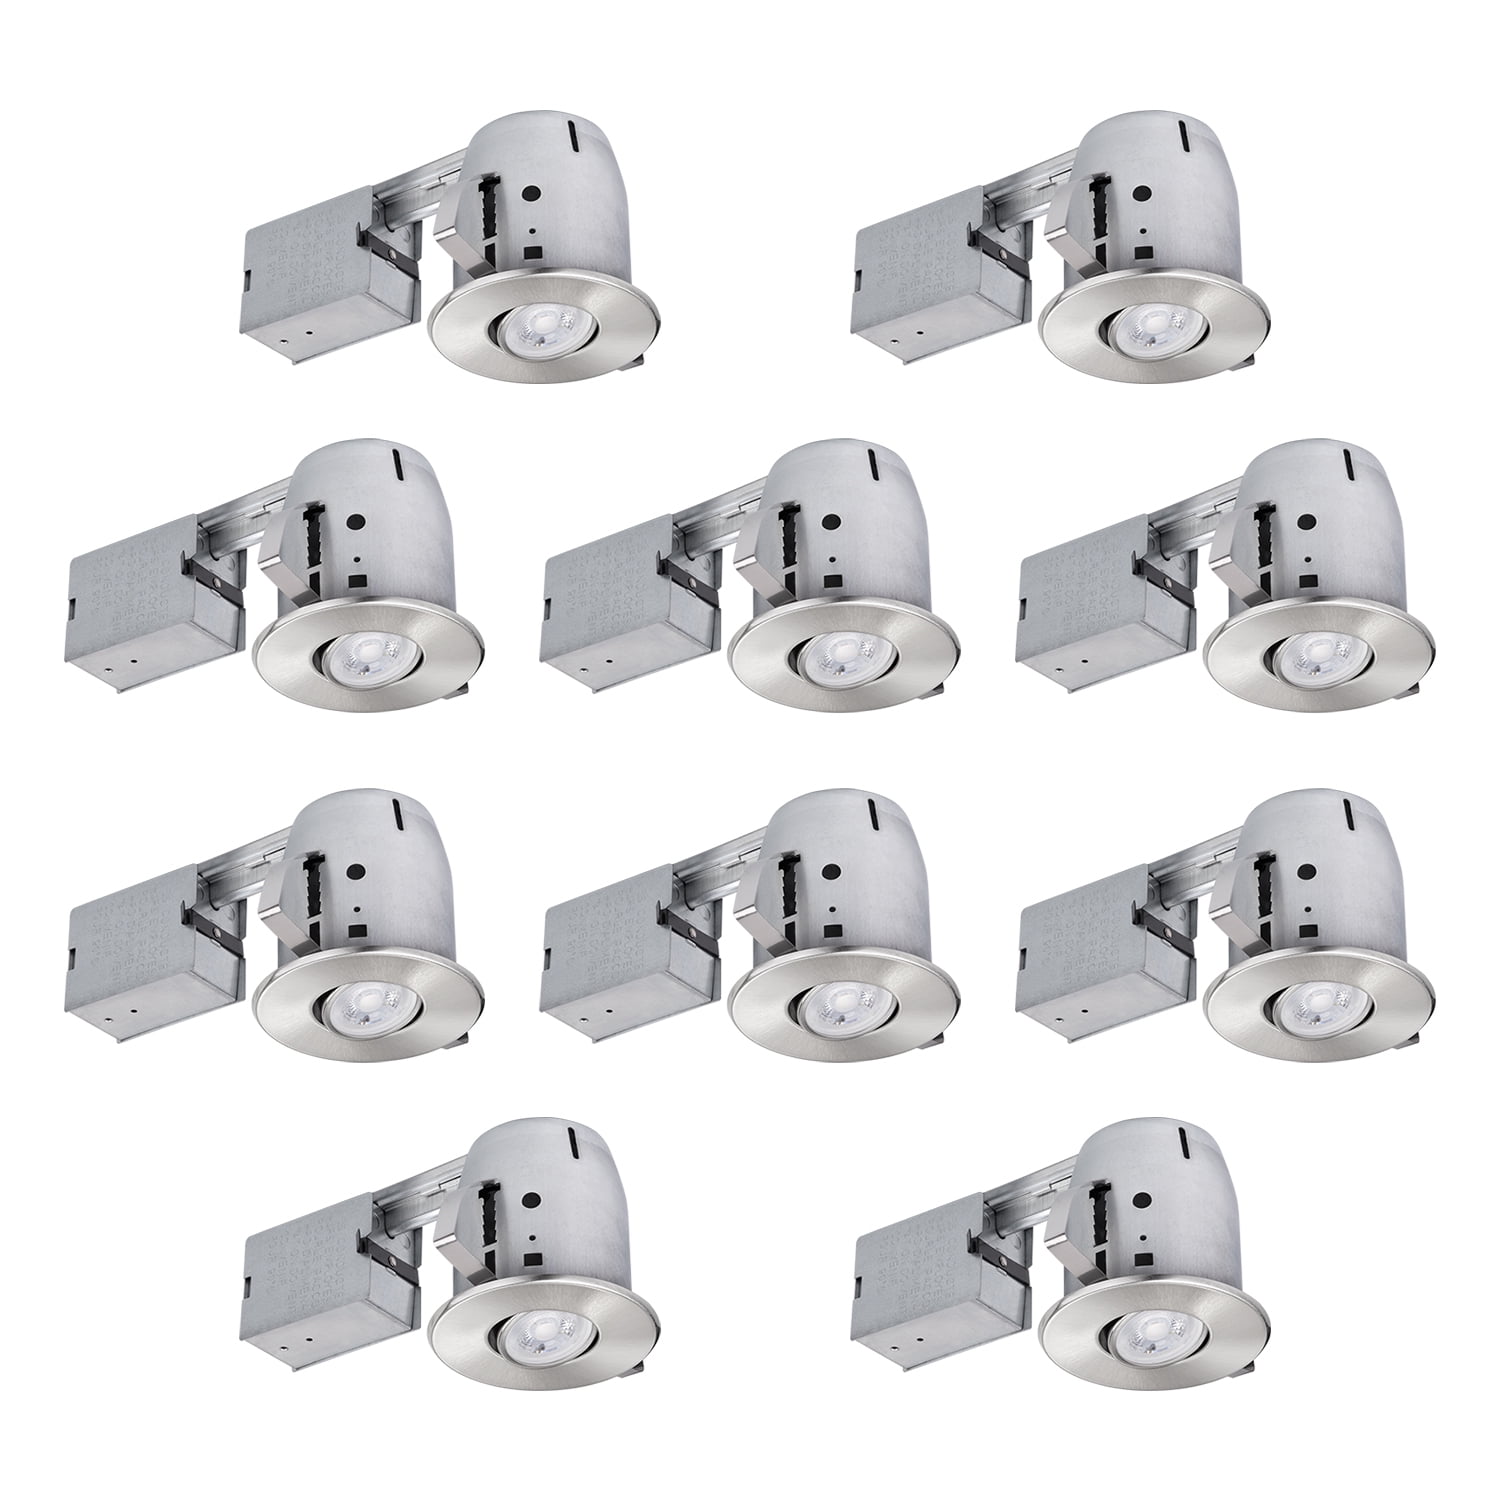 Globe Electric 4 Swivel Round Trim Recessed Lighting Kit Easy Install Push-N-Click Clips 3.88 Hole Size 90440 White 